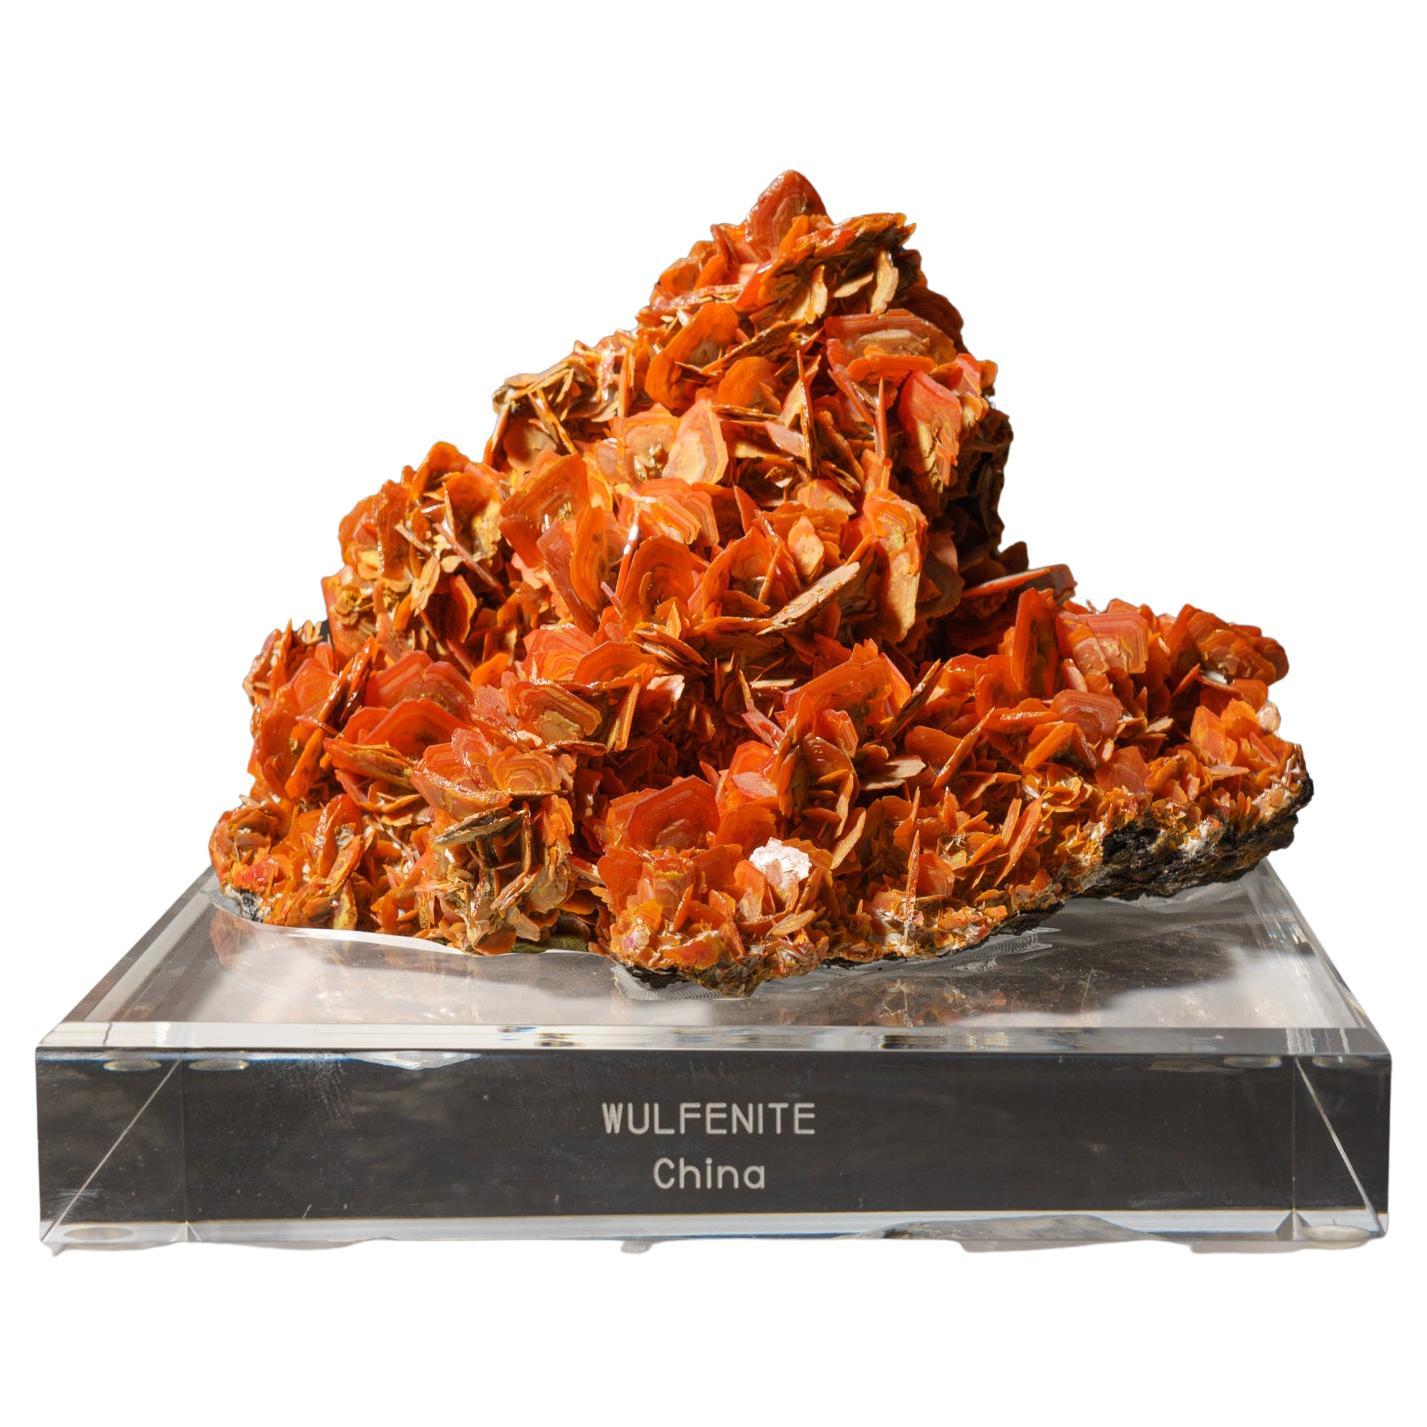 Wulfenite Mineral Crystal from China (1.33 lbs) For Sale